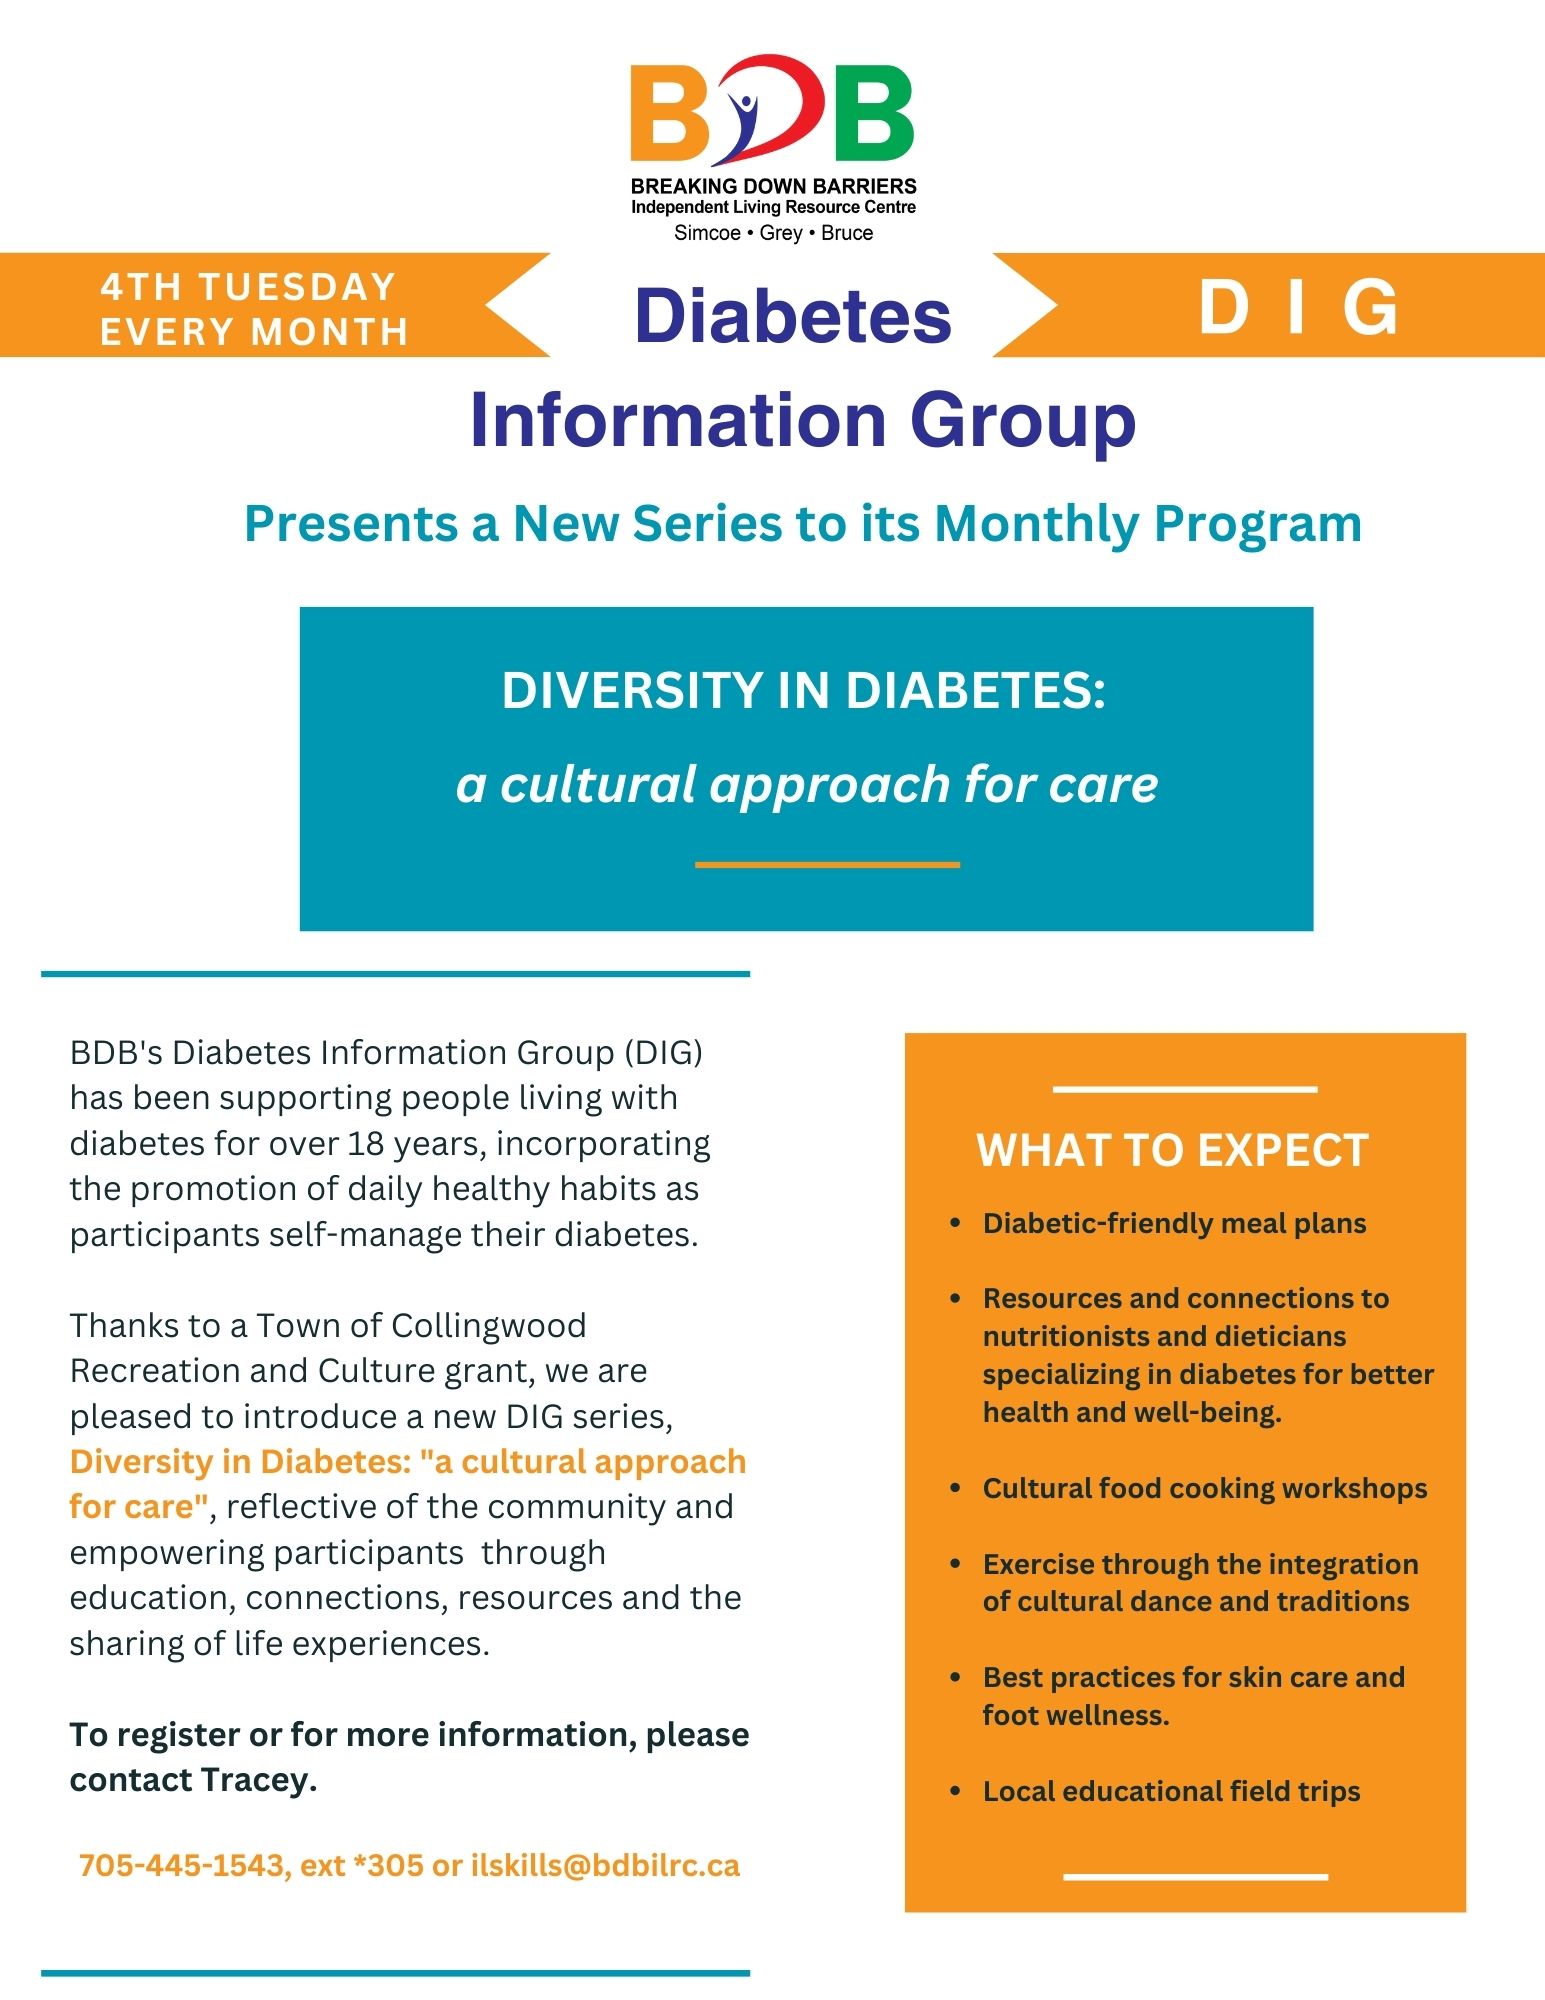 Our diabetes information series has a fresh new look!